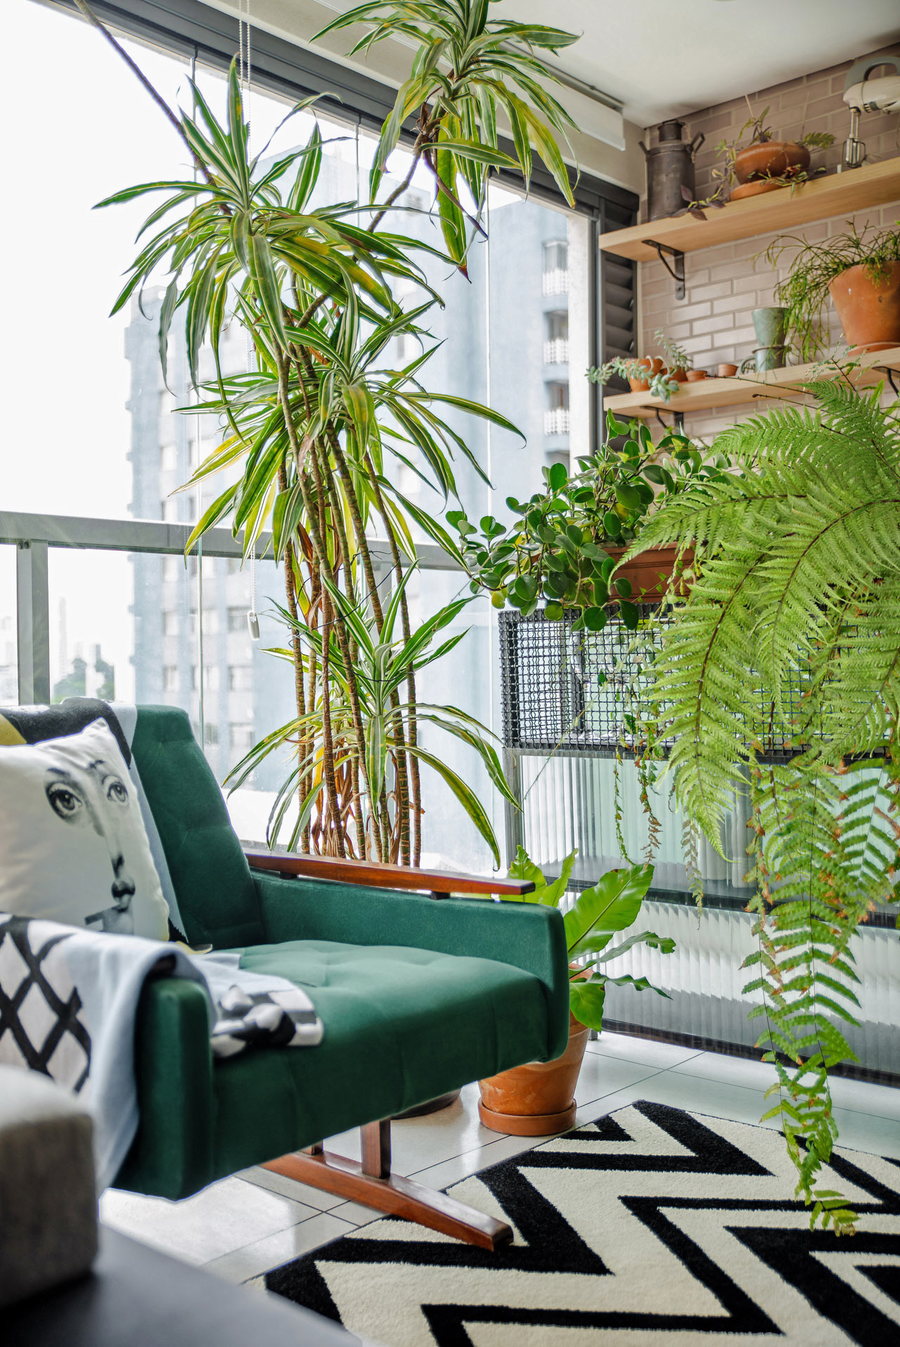 Small armchair in the FM House Living Room surrounded by lush houseplants.